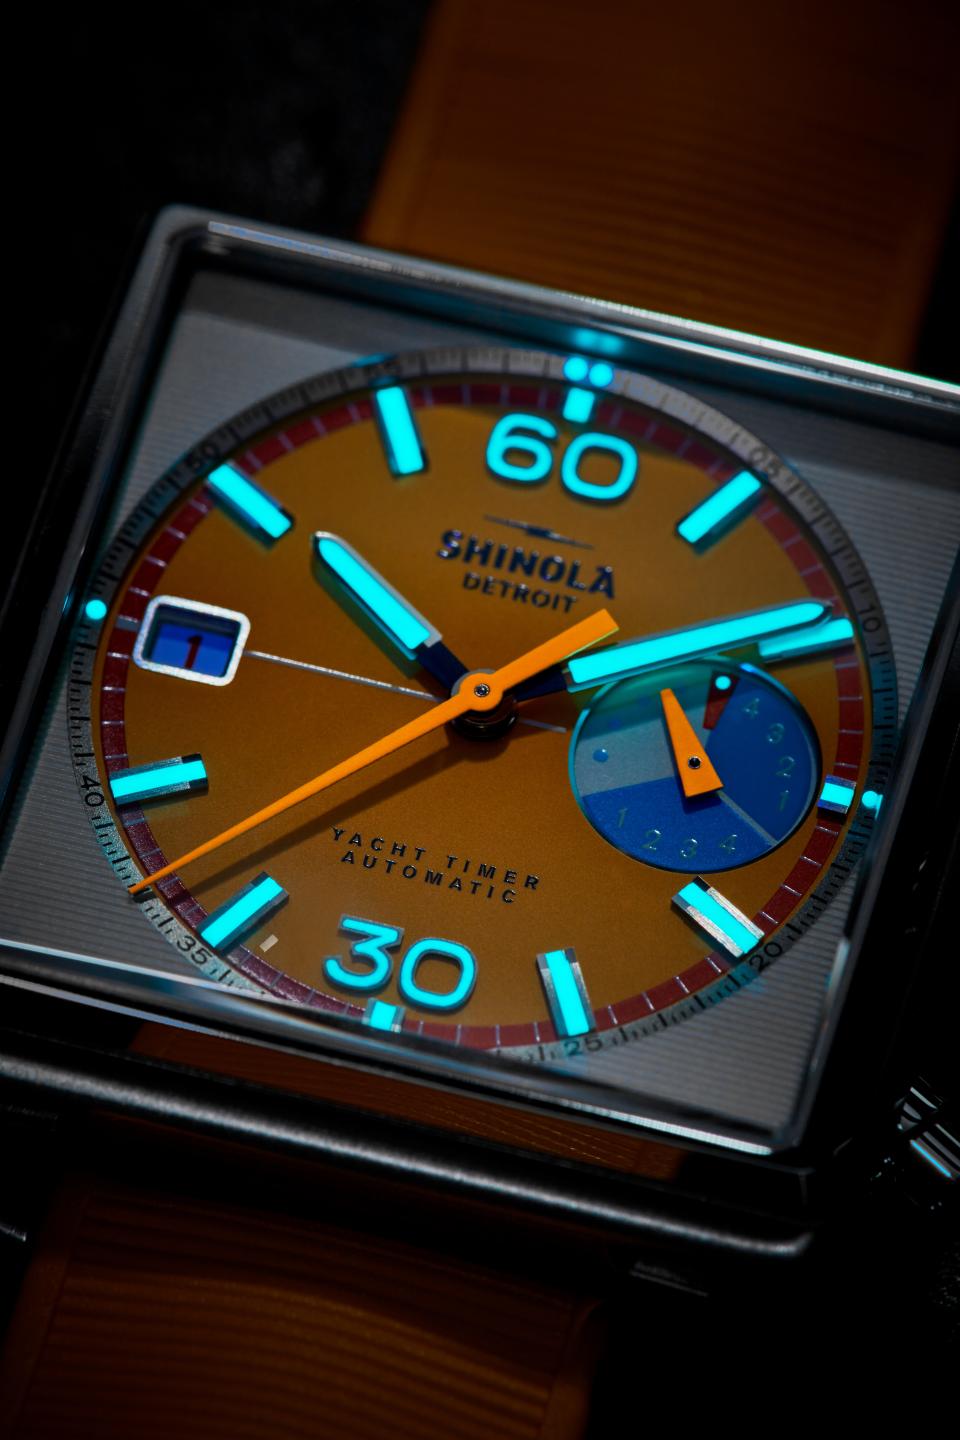 Shinola created Mackinac Yacht Watch Automatic that can get wet and provide a lit watch face for night racing. It went on sale the day of the 2022 Bayview Mackinac Race from Port Huron to Mackinac Island on July 16.